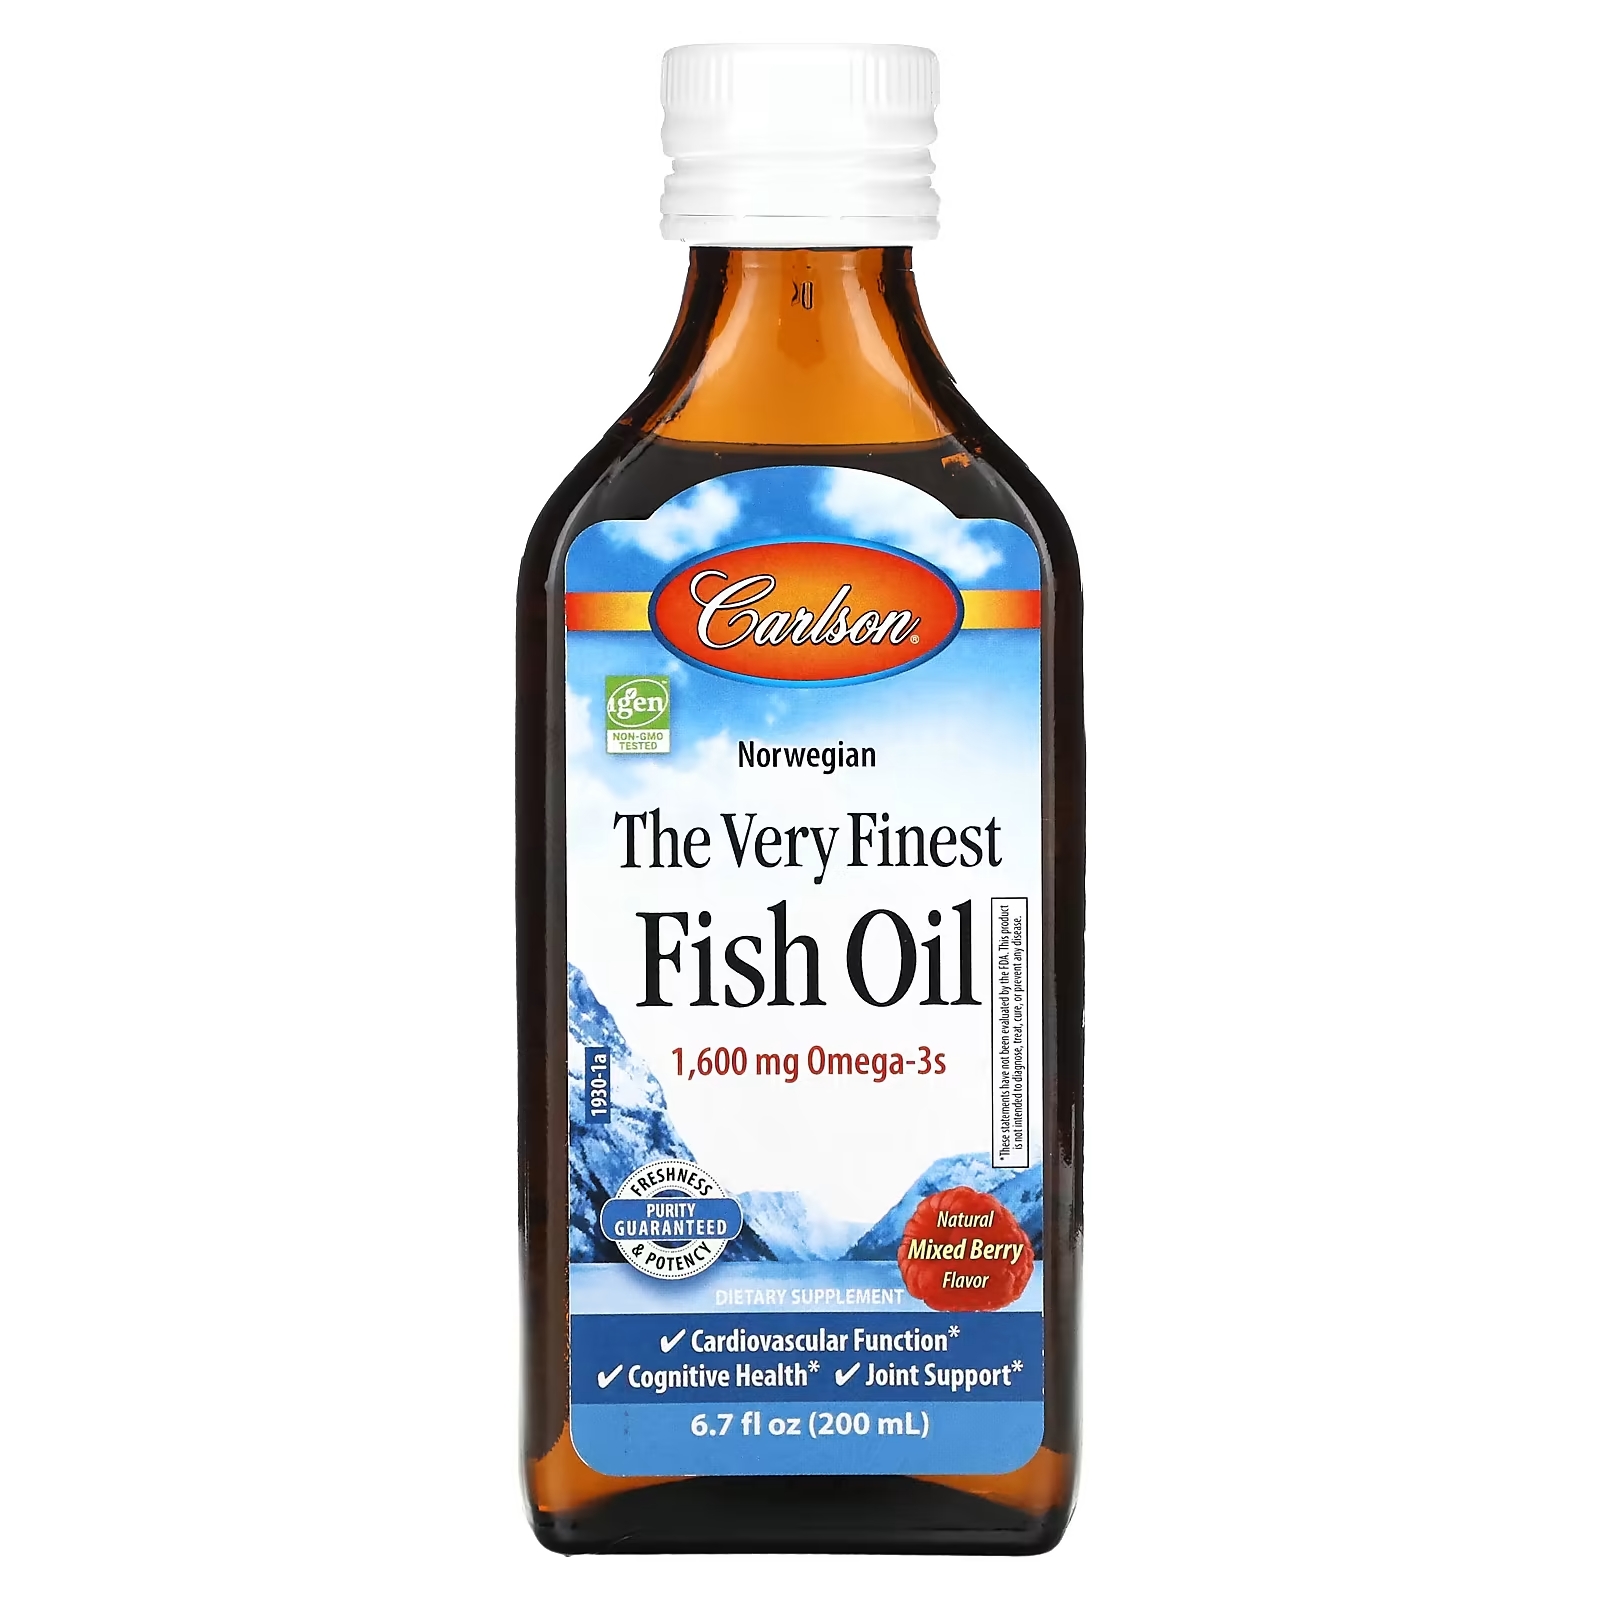 Carlson Norwegian The Very Finest Fish Oil Natural Mixed Berry 1,600 mg, 200 мл carlson the very finest fish oil just peachie 1 600 mg 6 7 fl oz 200 ml